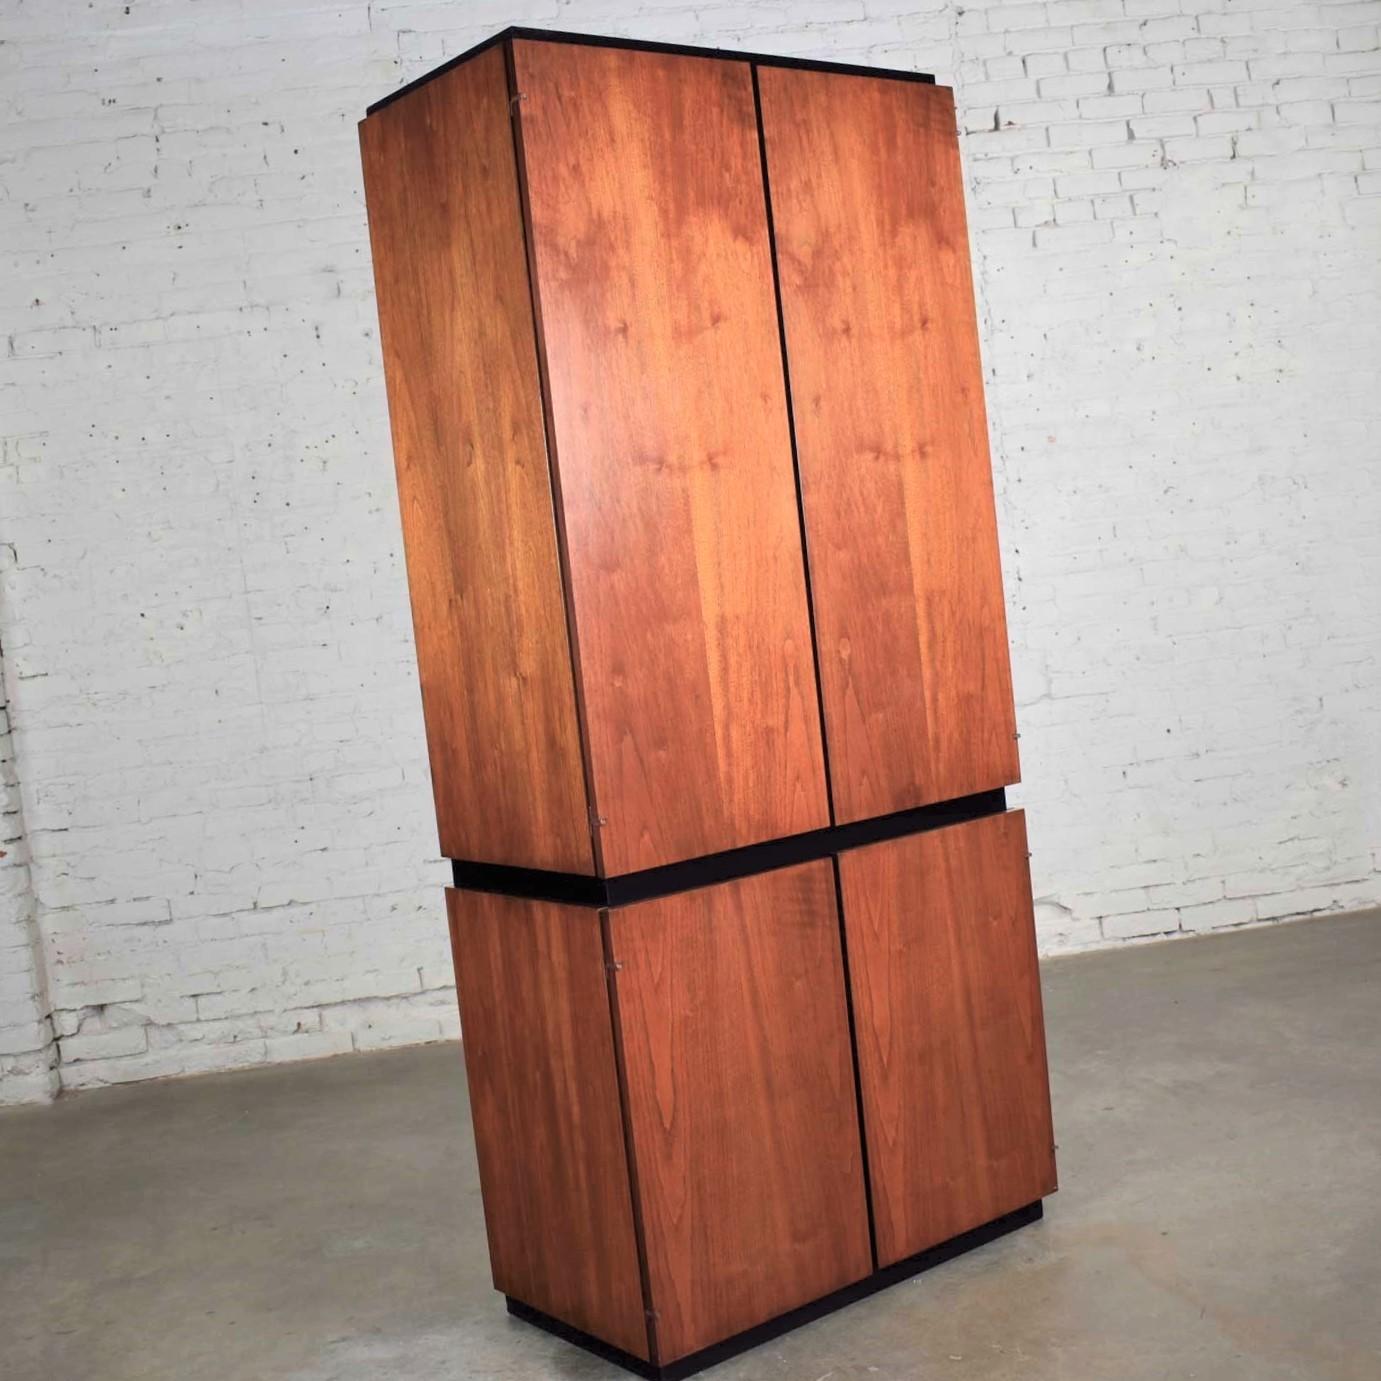 Handsome modern or Mid-Century Modern style entertainment cabinet or storage armoire in walnut with black accents by the Barzilay Furniture Mfg. Company. It is in fabulous vintage condition with no outstanding flaws we have found. Please see photos,